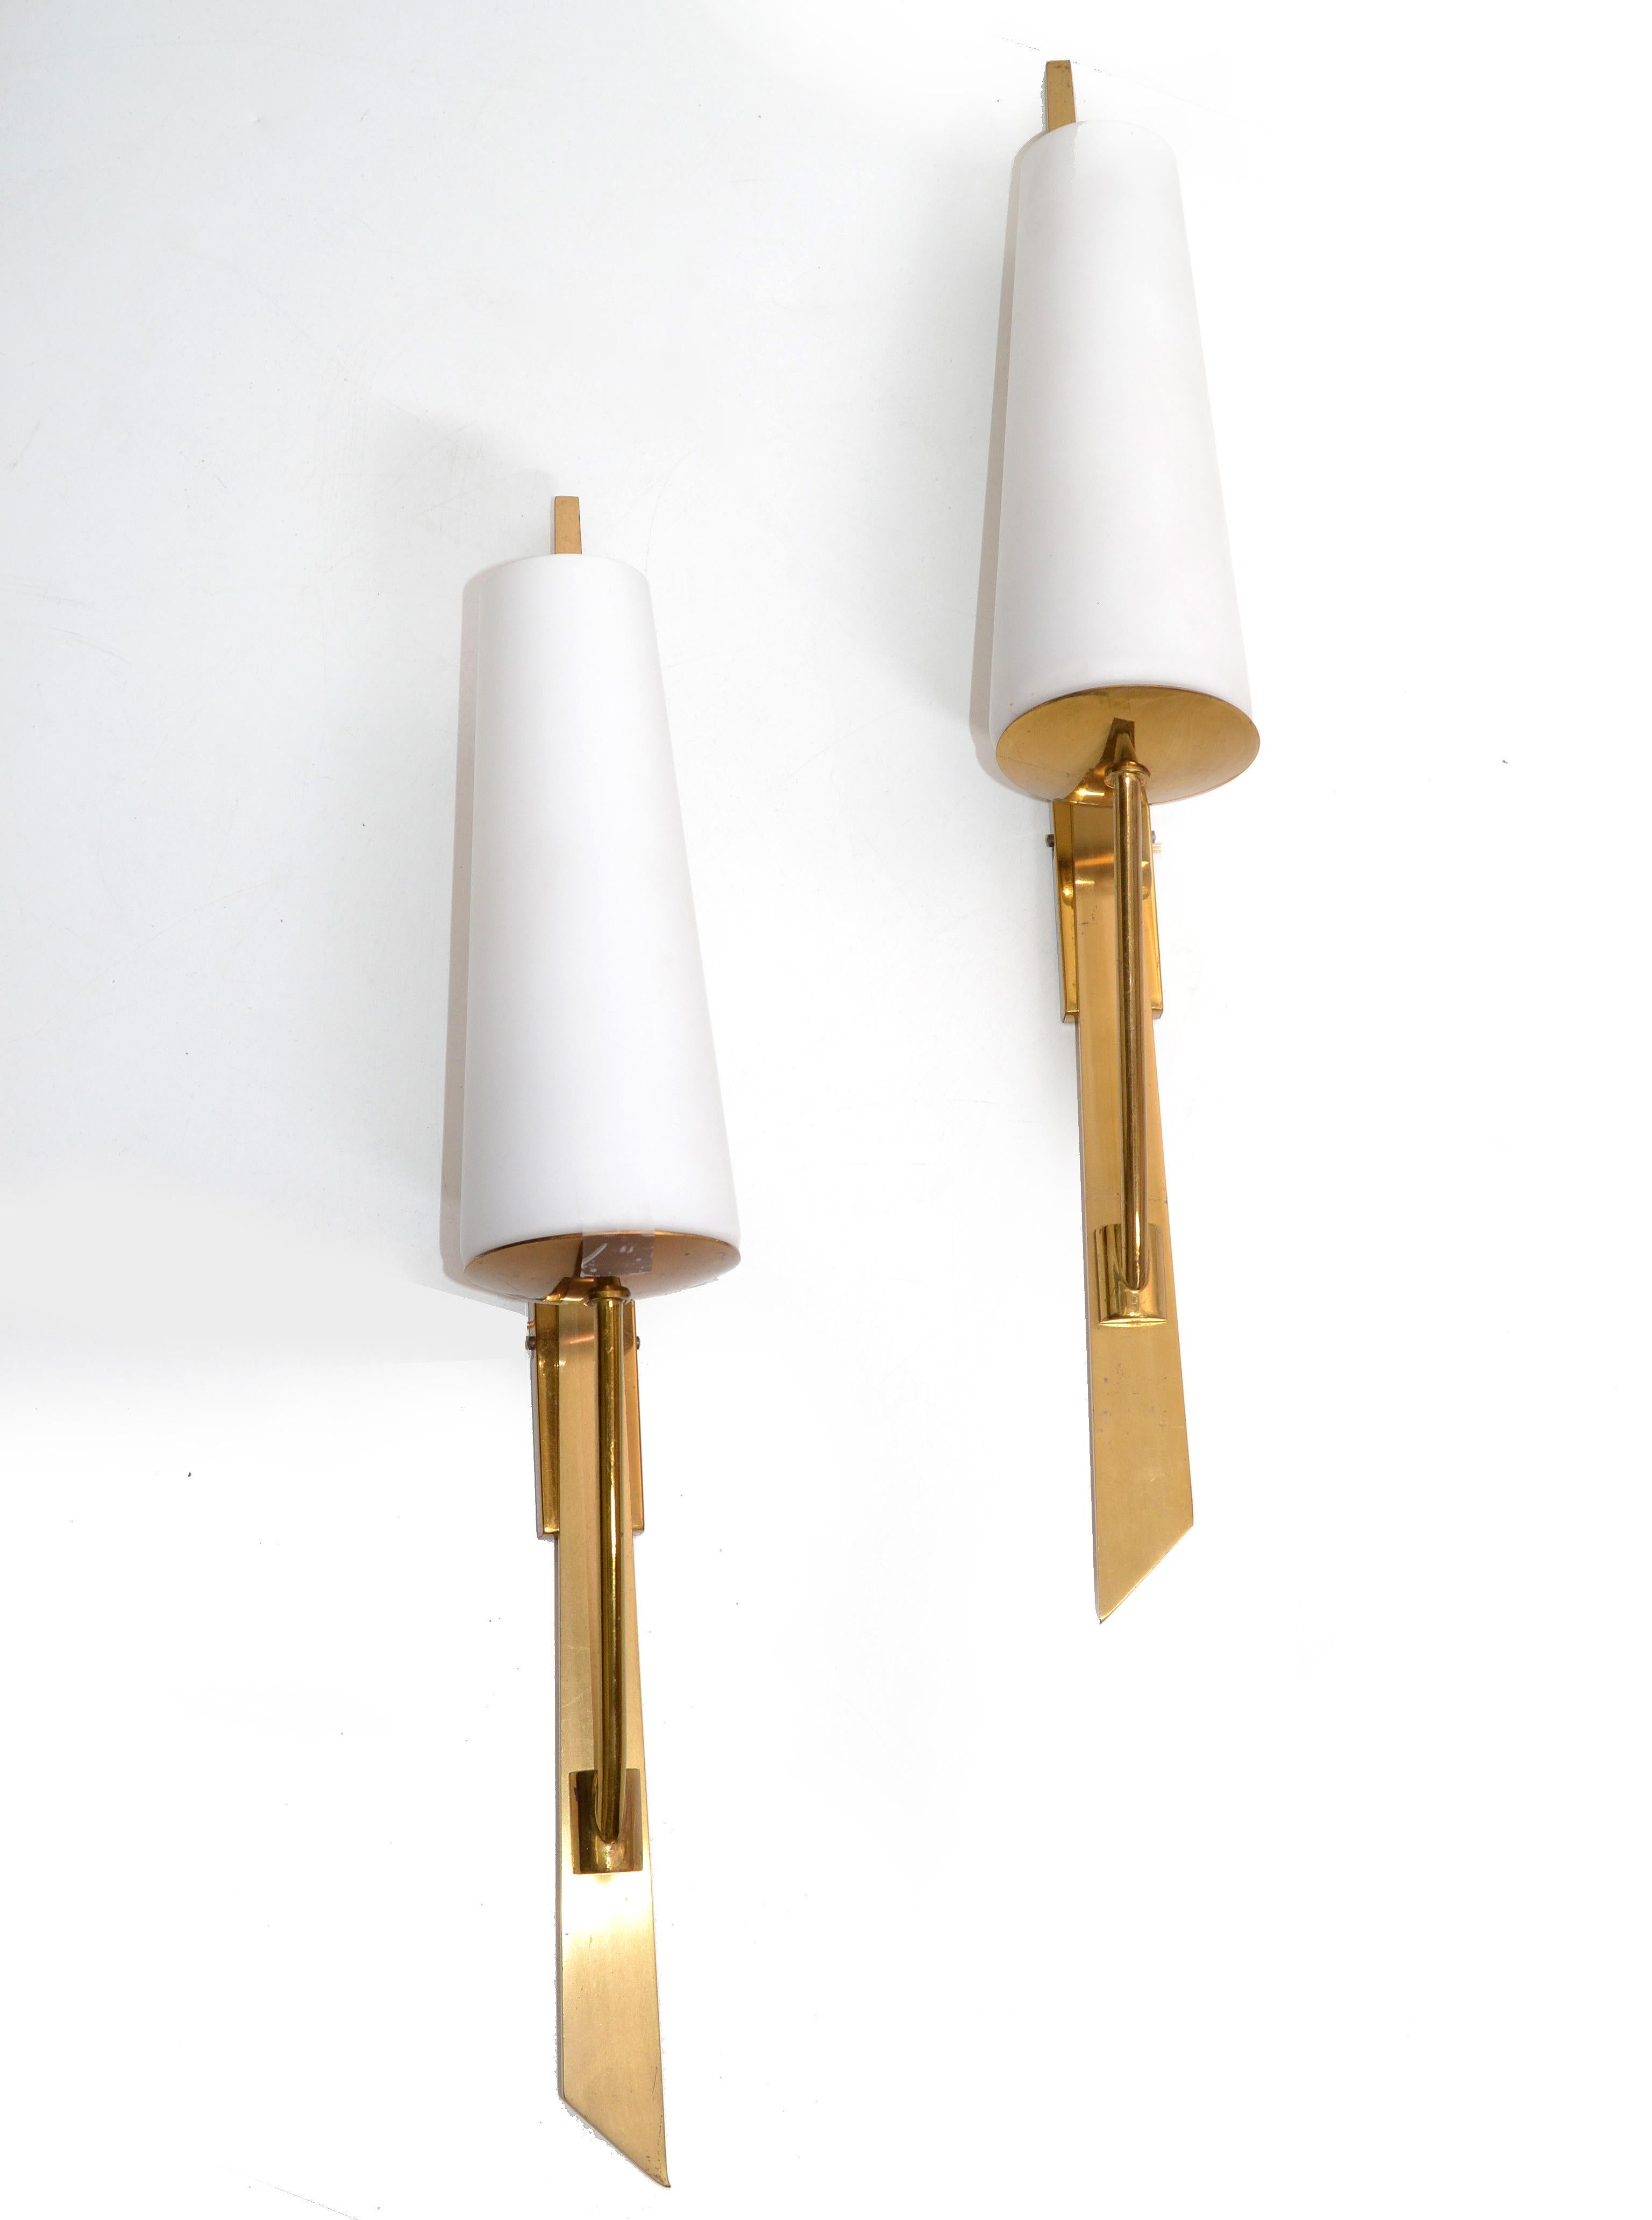 Hand-Crafted Maison Arlus Brass Sconces, 4 pairs available